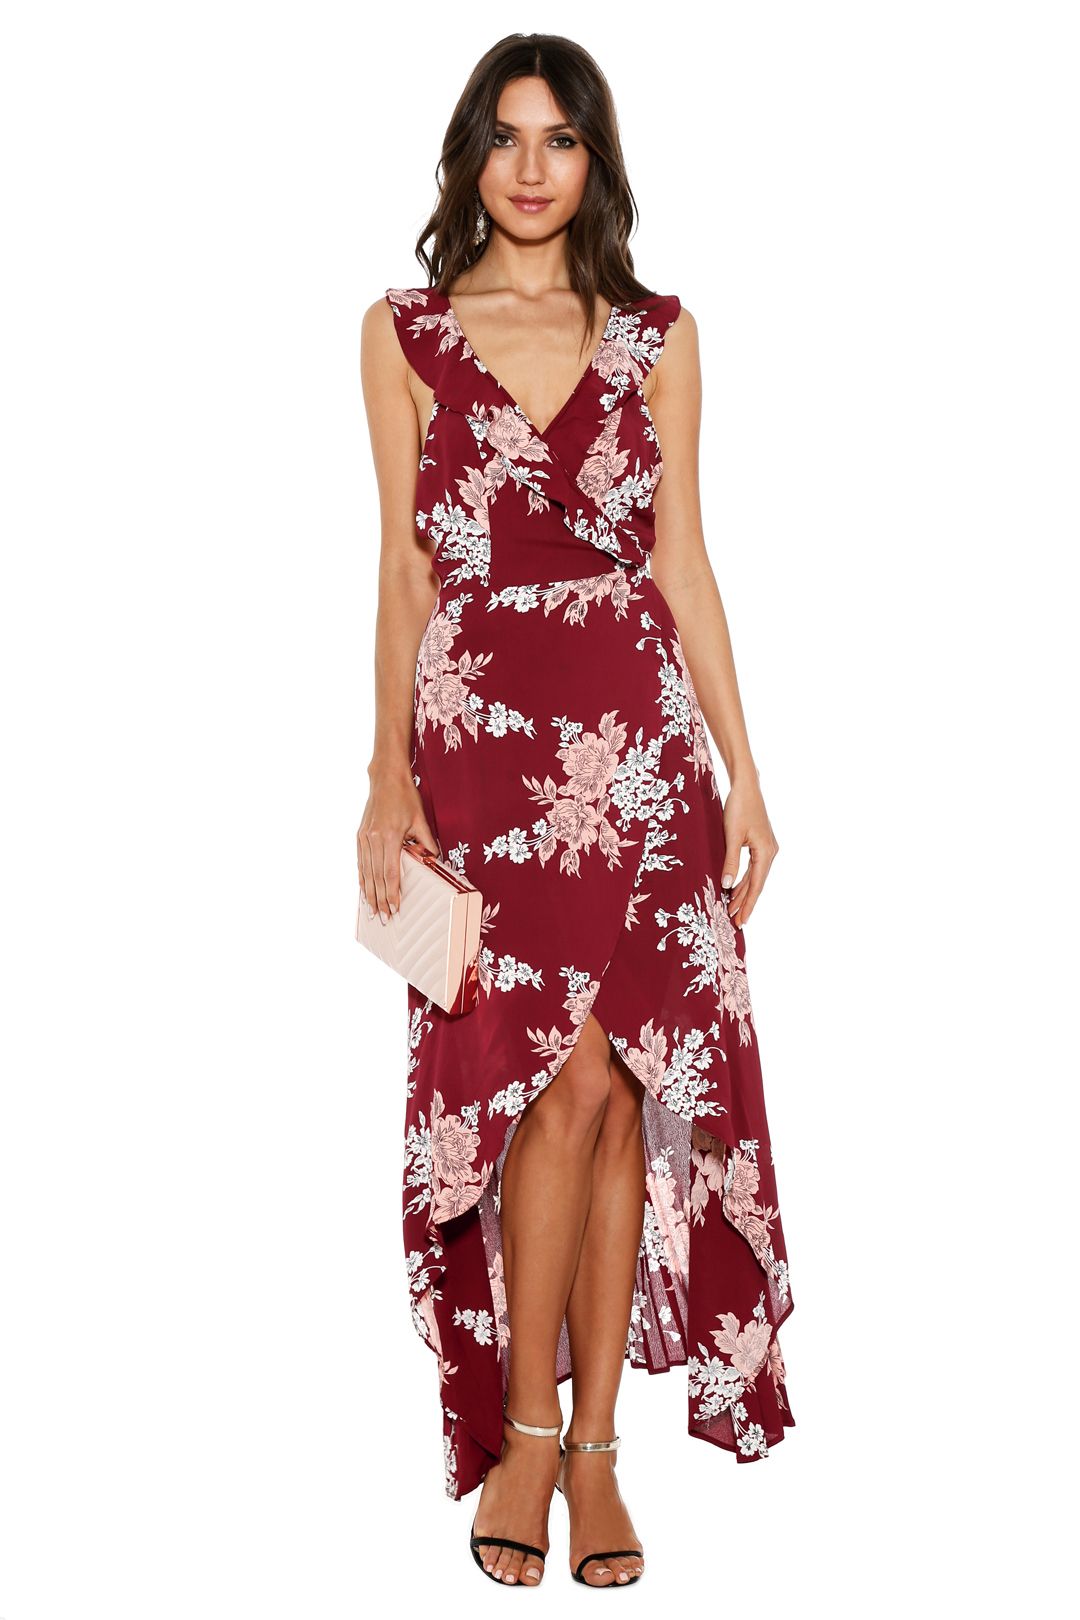 Privacy Please - Fillmore Dress - Front